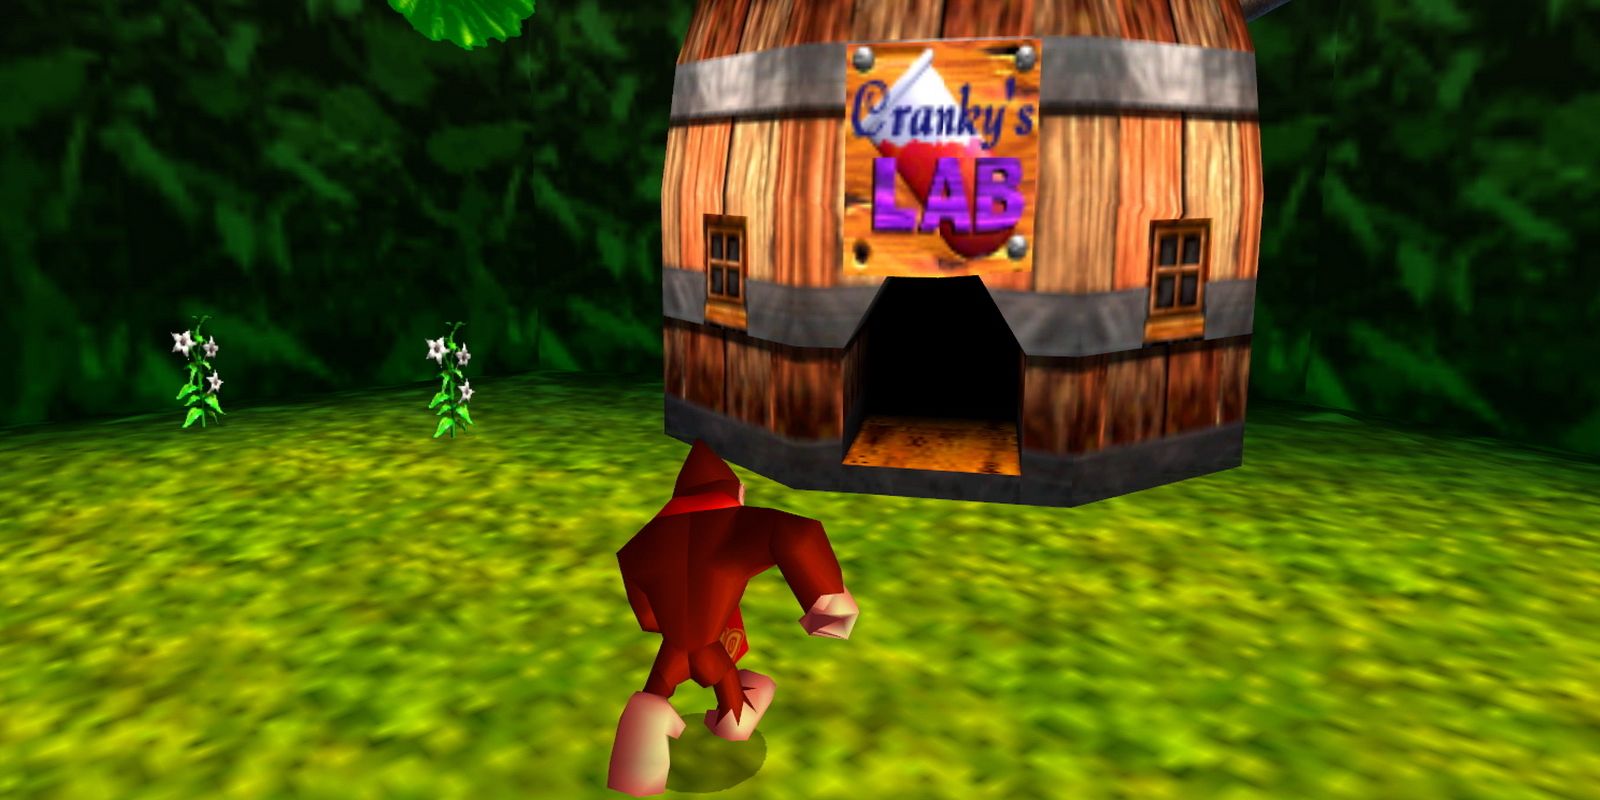 Donkey Kong goes into Cranky's Lab in the controversial Donkey Kong 64.